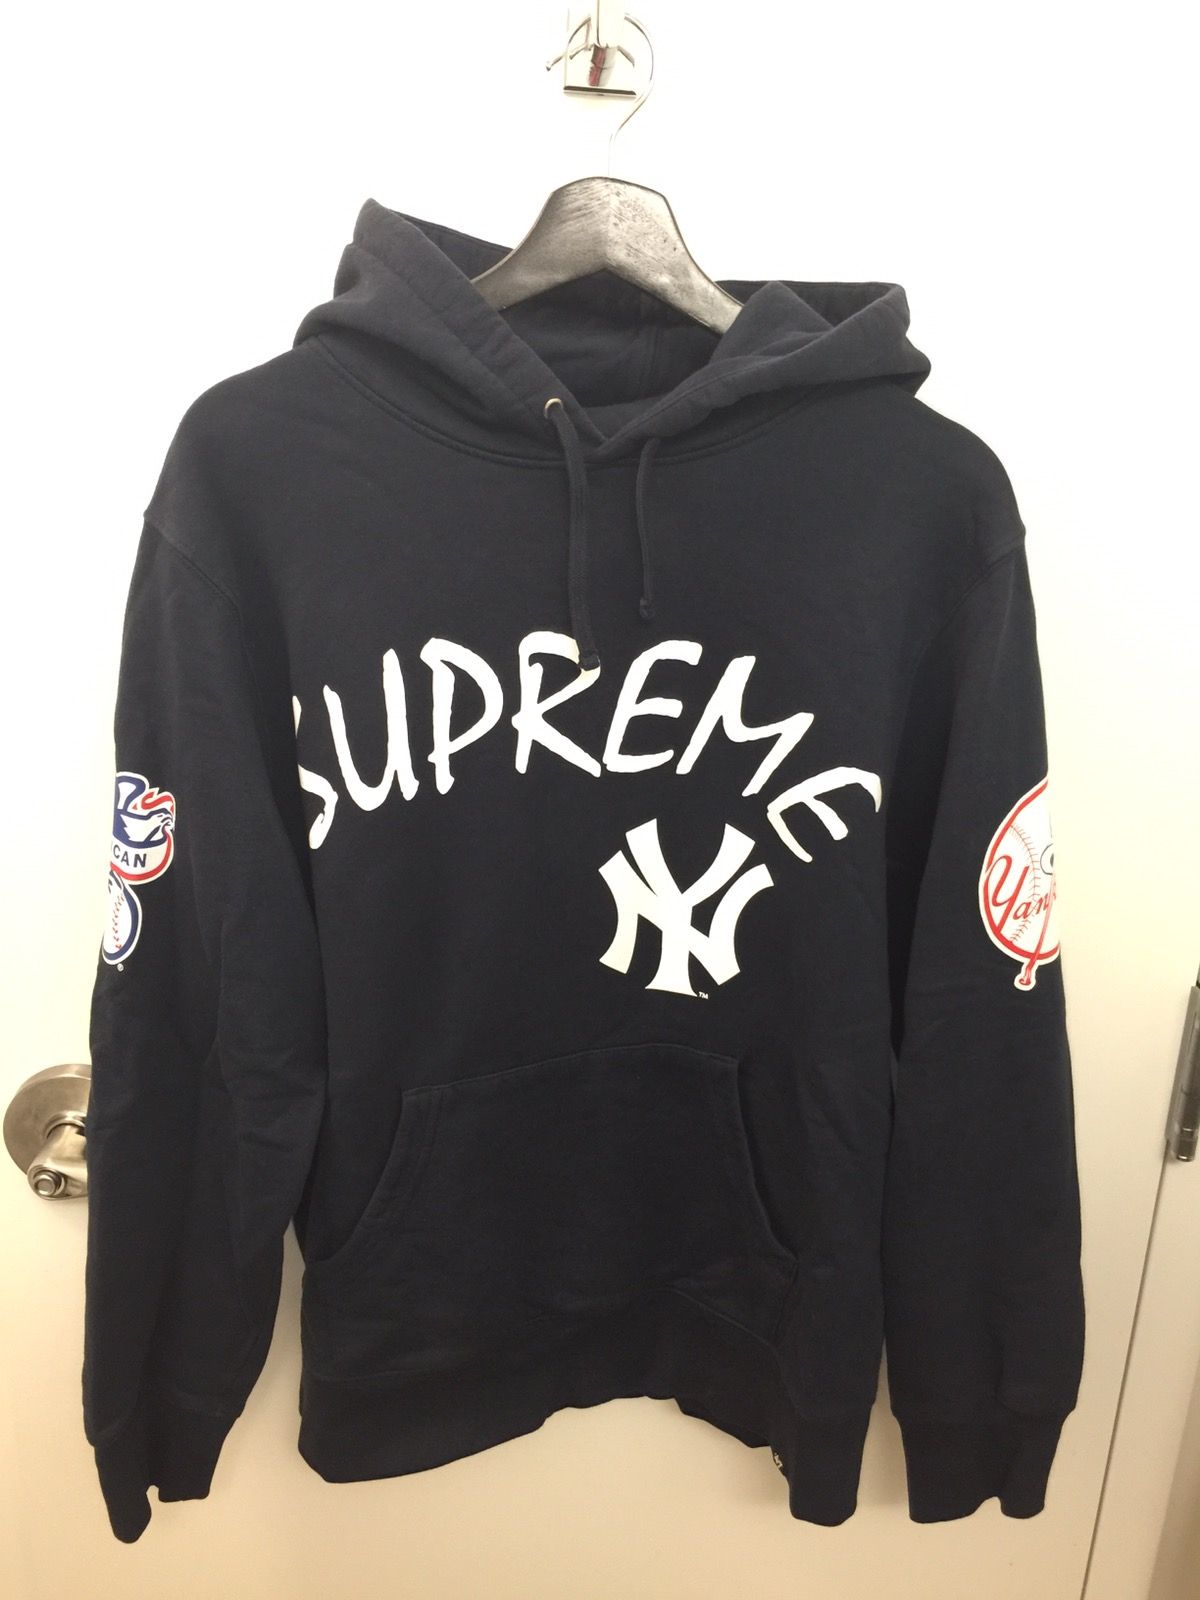 Supreme Supreme x NY Yankees Hoodie in Navy Size US M / EU 48-50 / 2 - 1 Preview